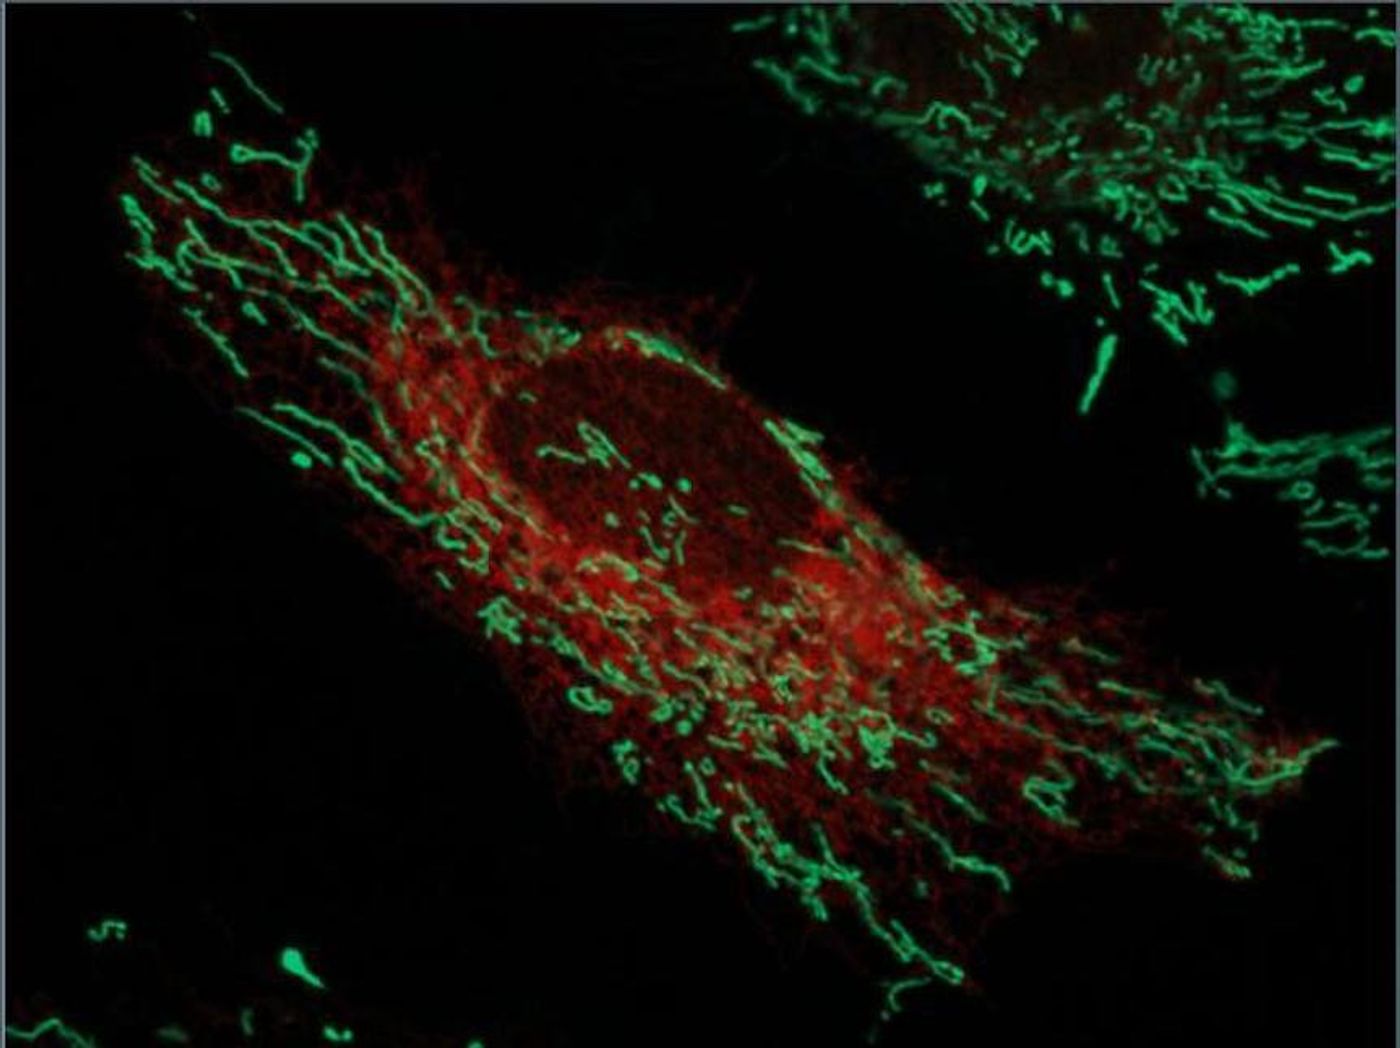 Live-imaged HeLa cells with the endoplasmic reticulum labeled red and mitochondria labeled green. / Credit: Image by Ginam Cho.